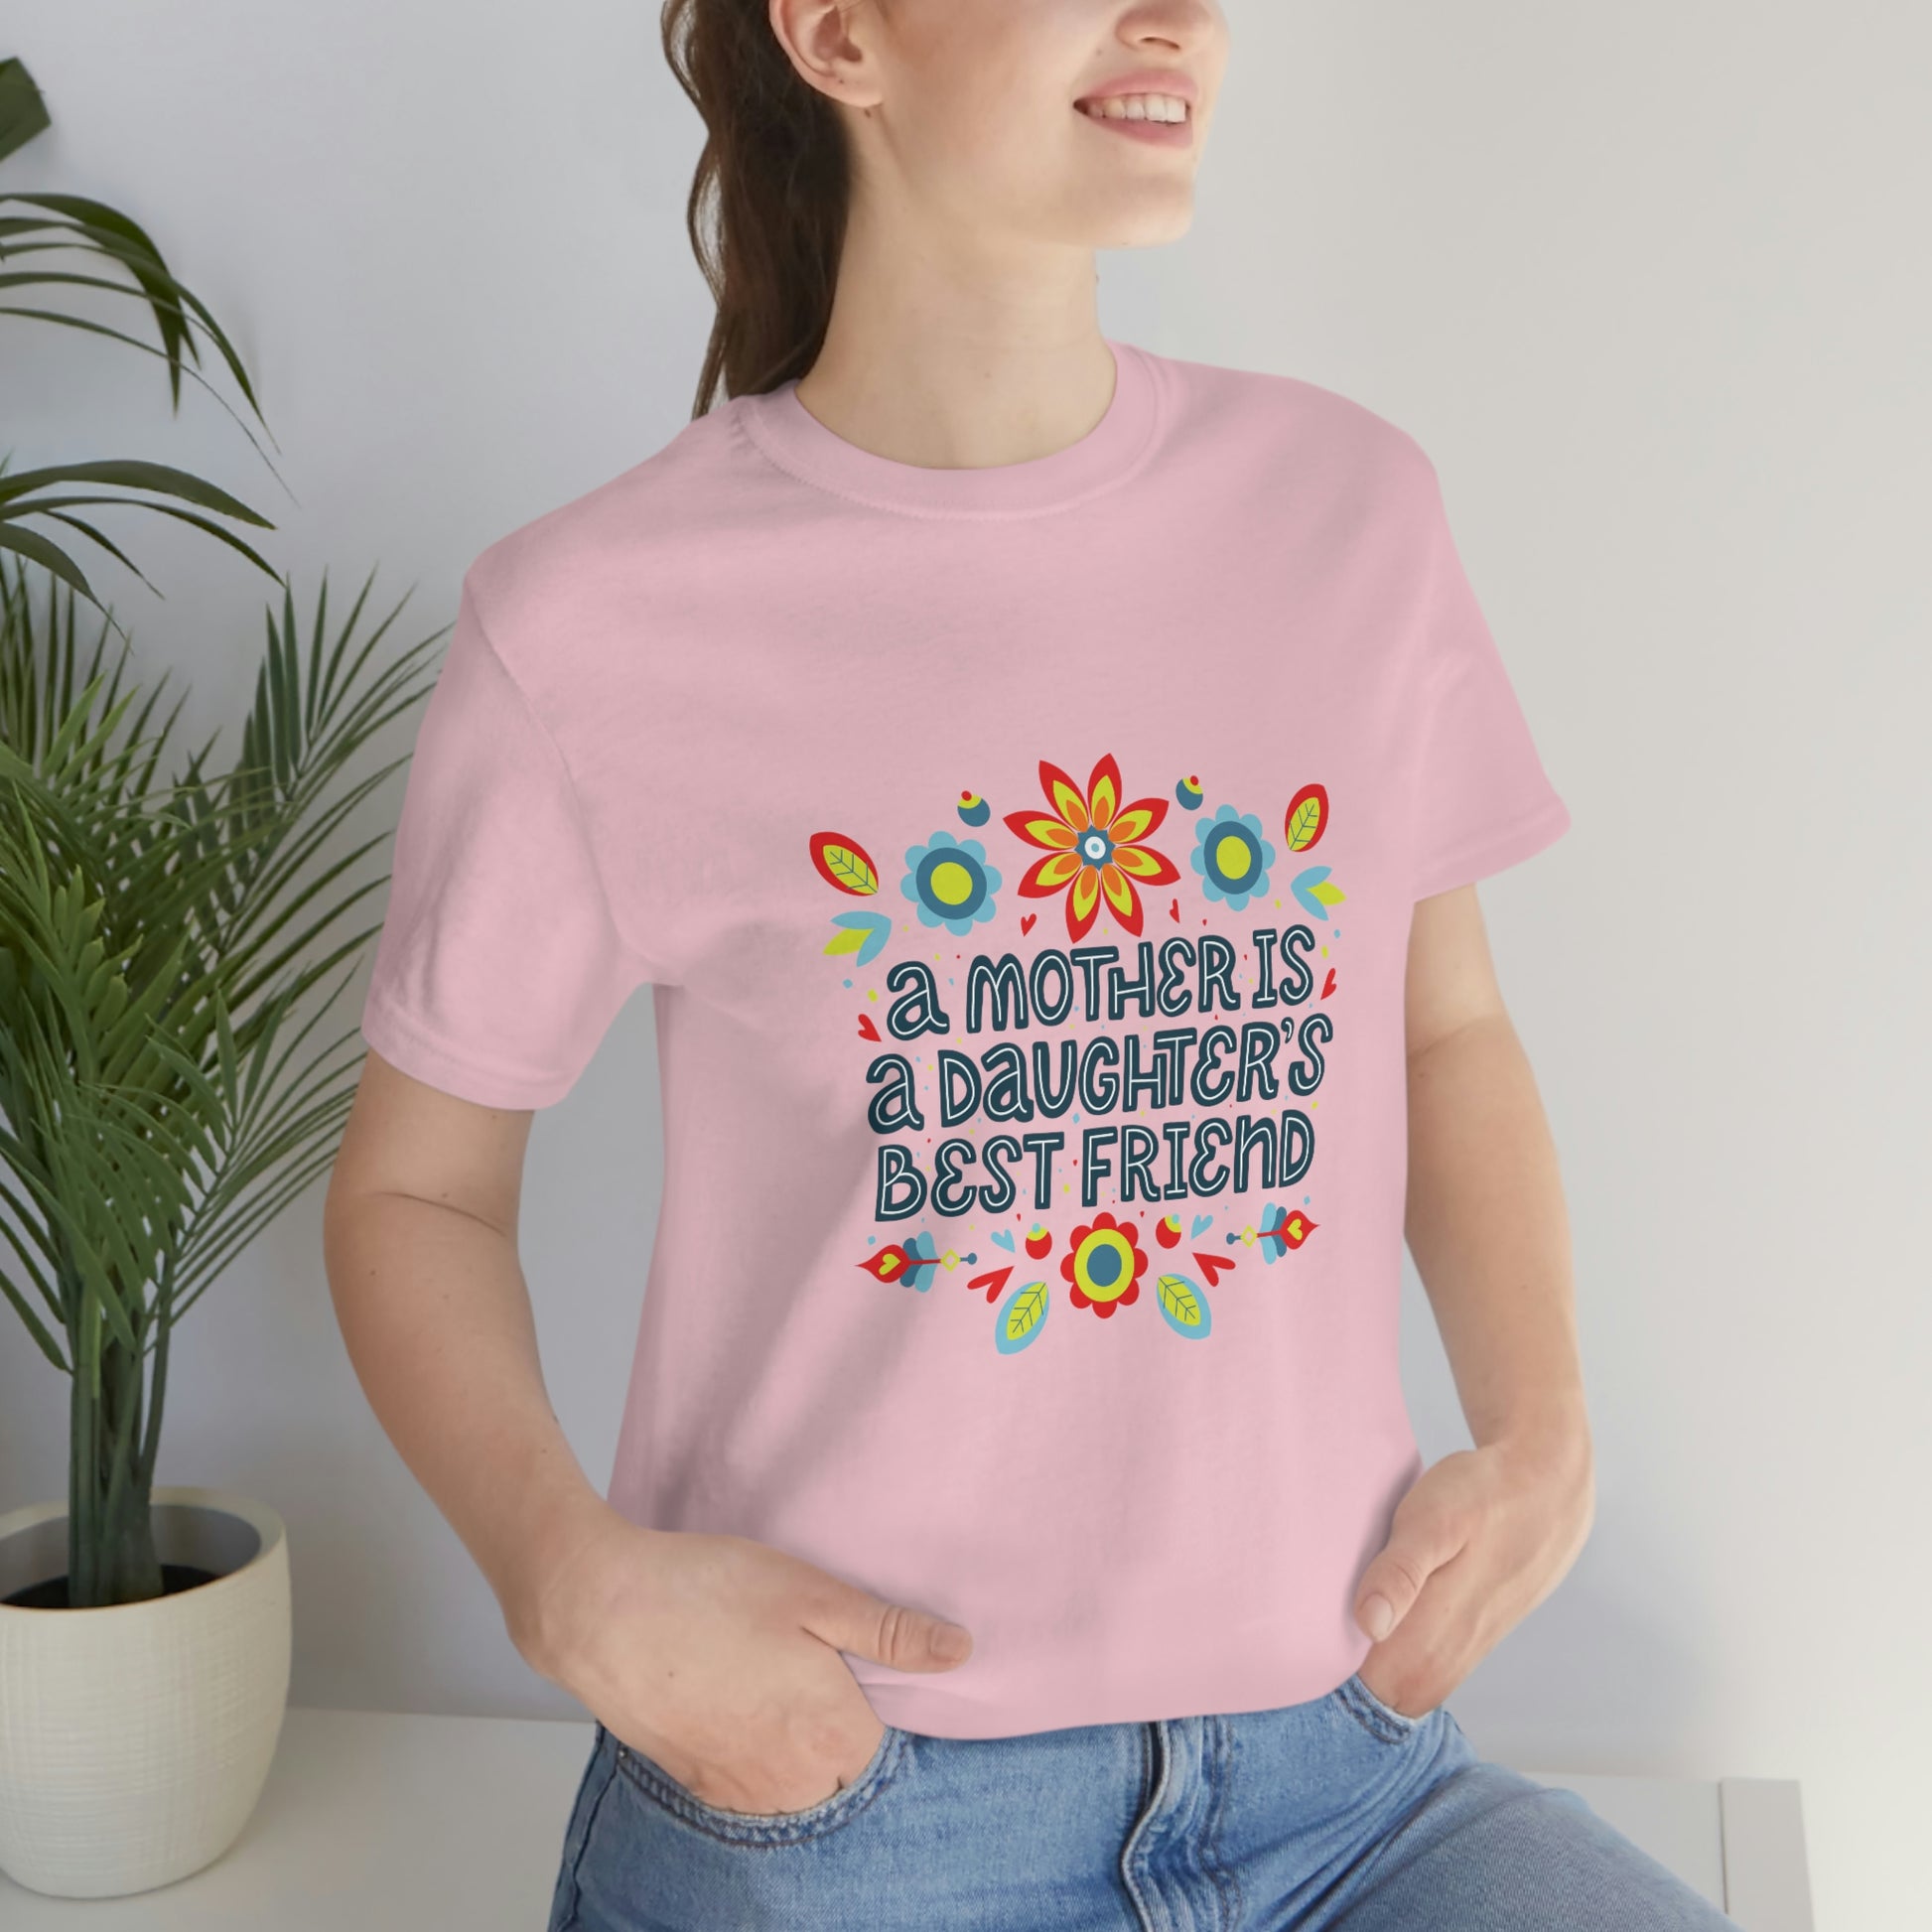 Show your gratitude for mom with this pink Best Friend Mom and Daughter T-Shirt. Perfect gift for mom.